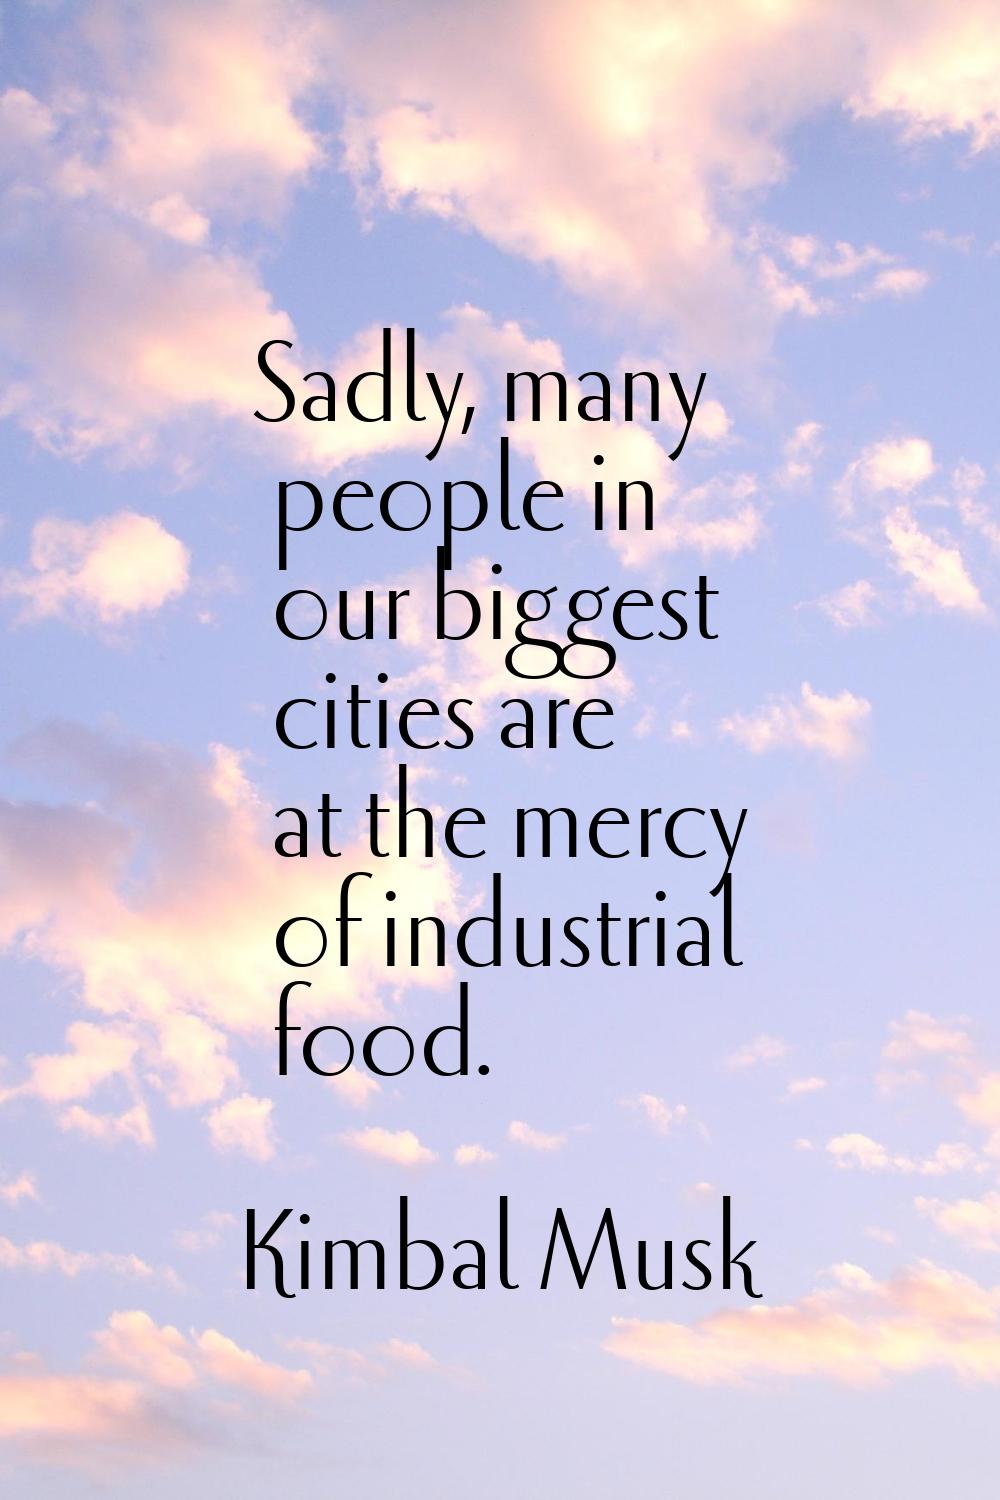 Sadly, many people in our biggest cities are at the mercy of industrial food.